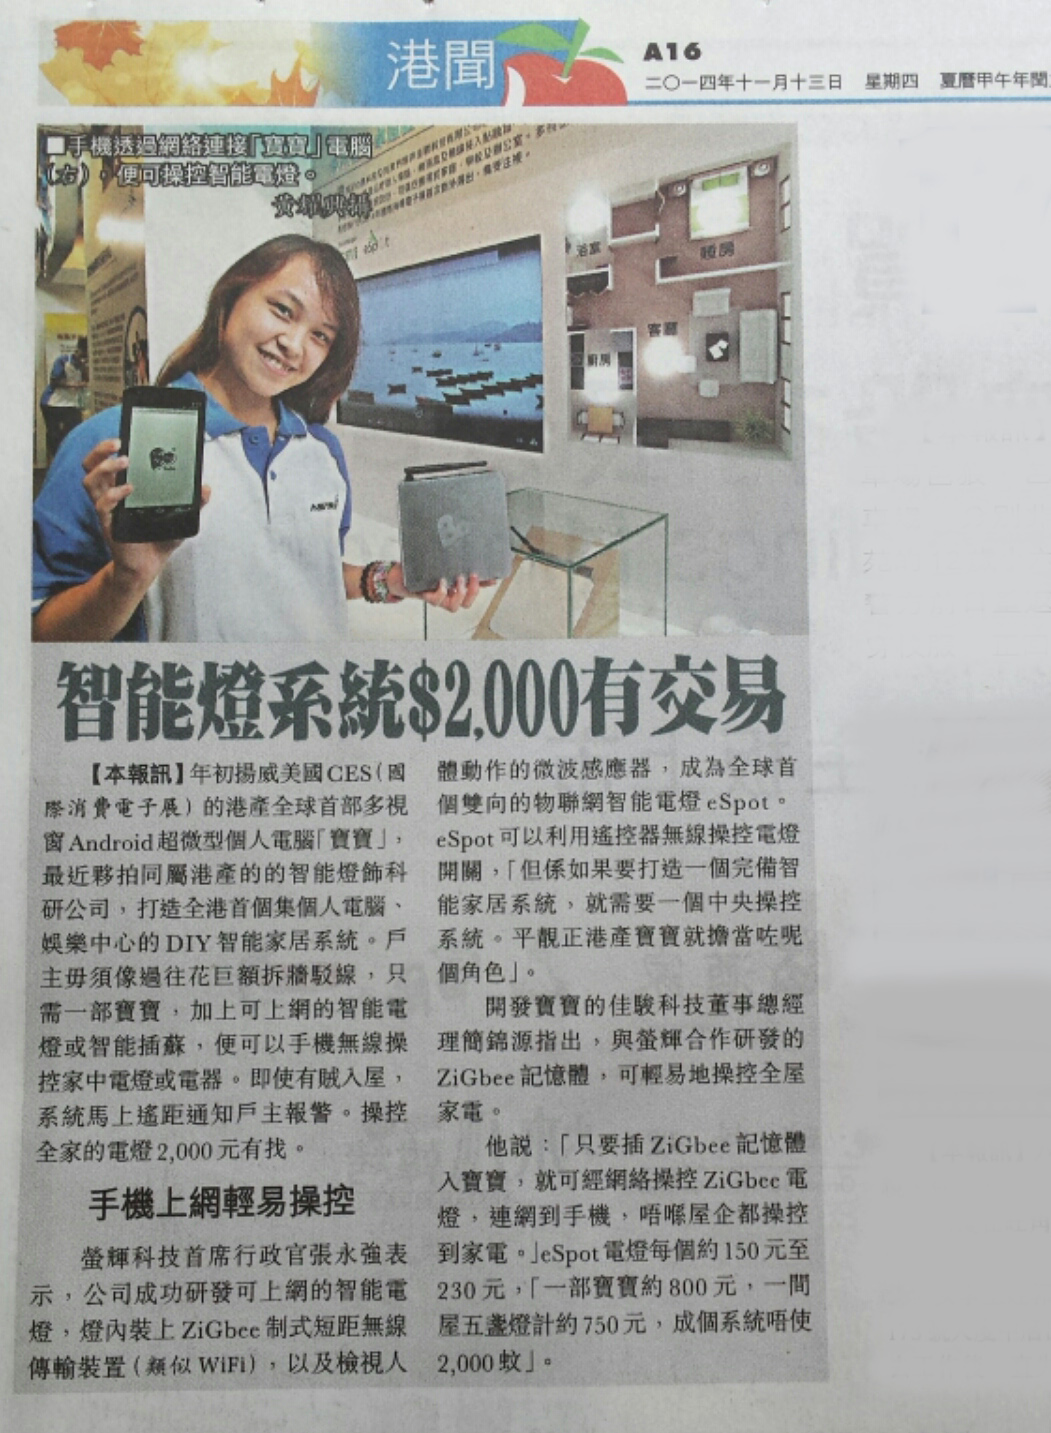 Newsclip of Apple Daily on 20141113